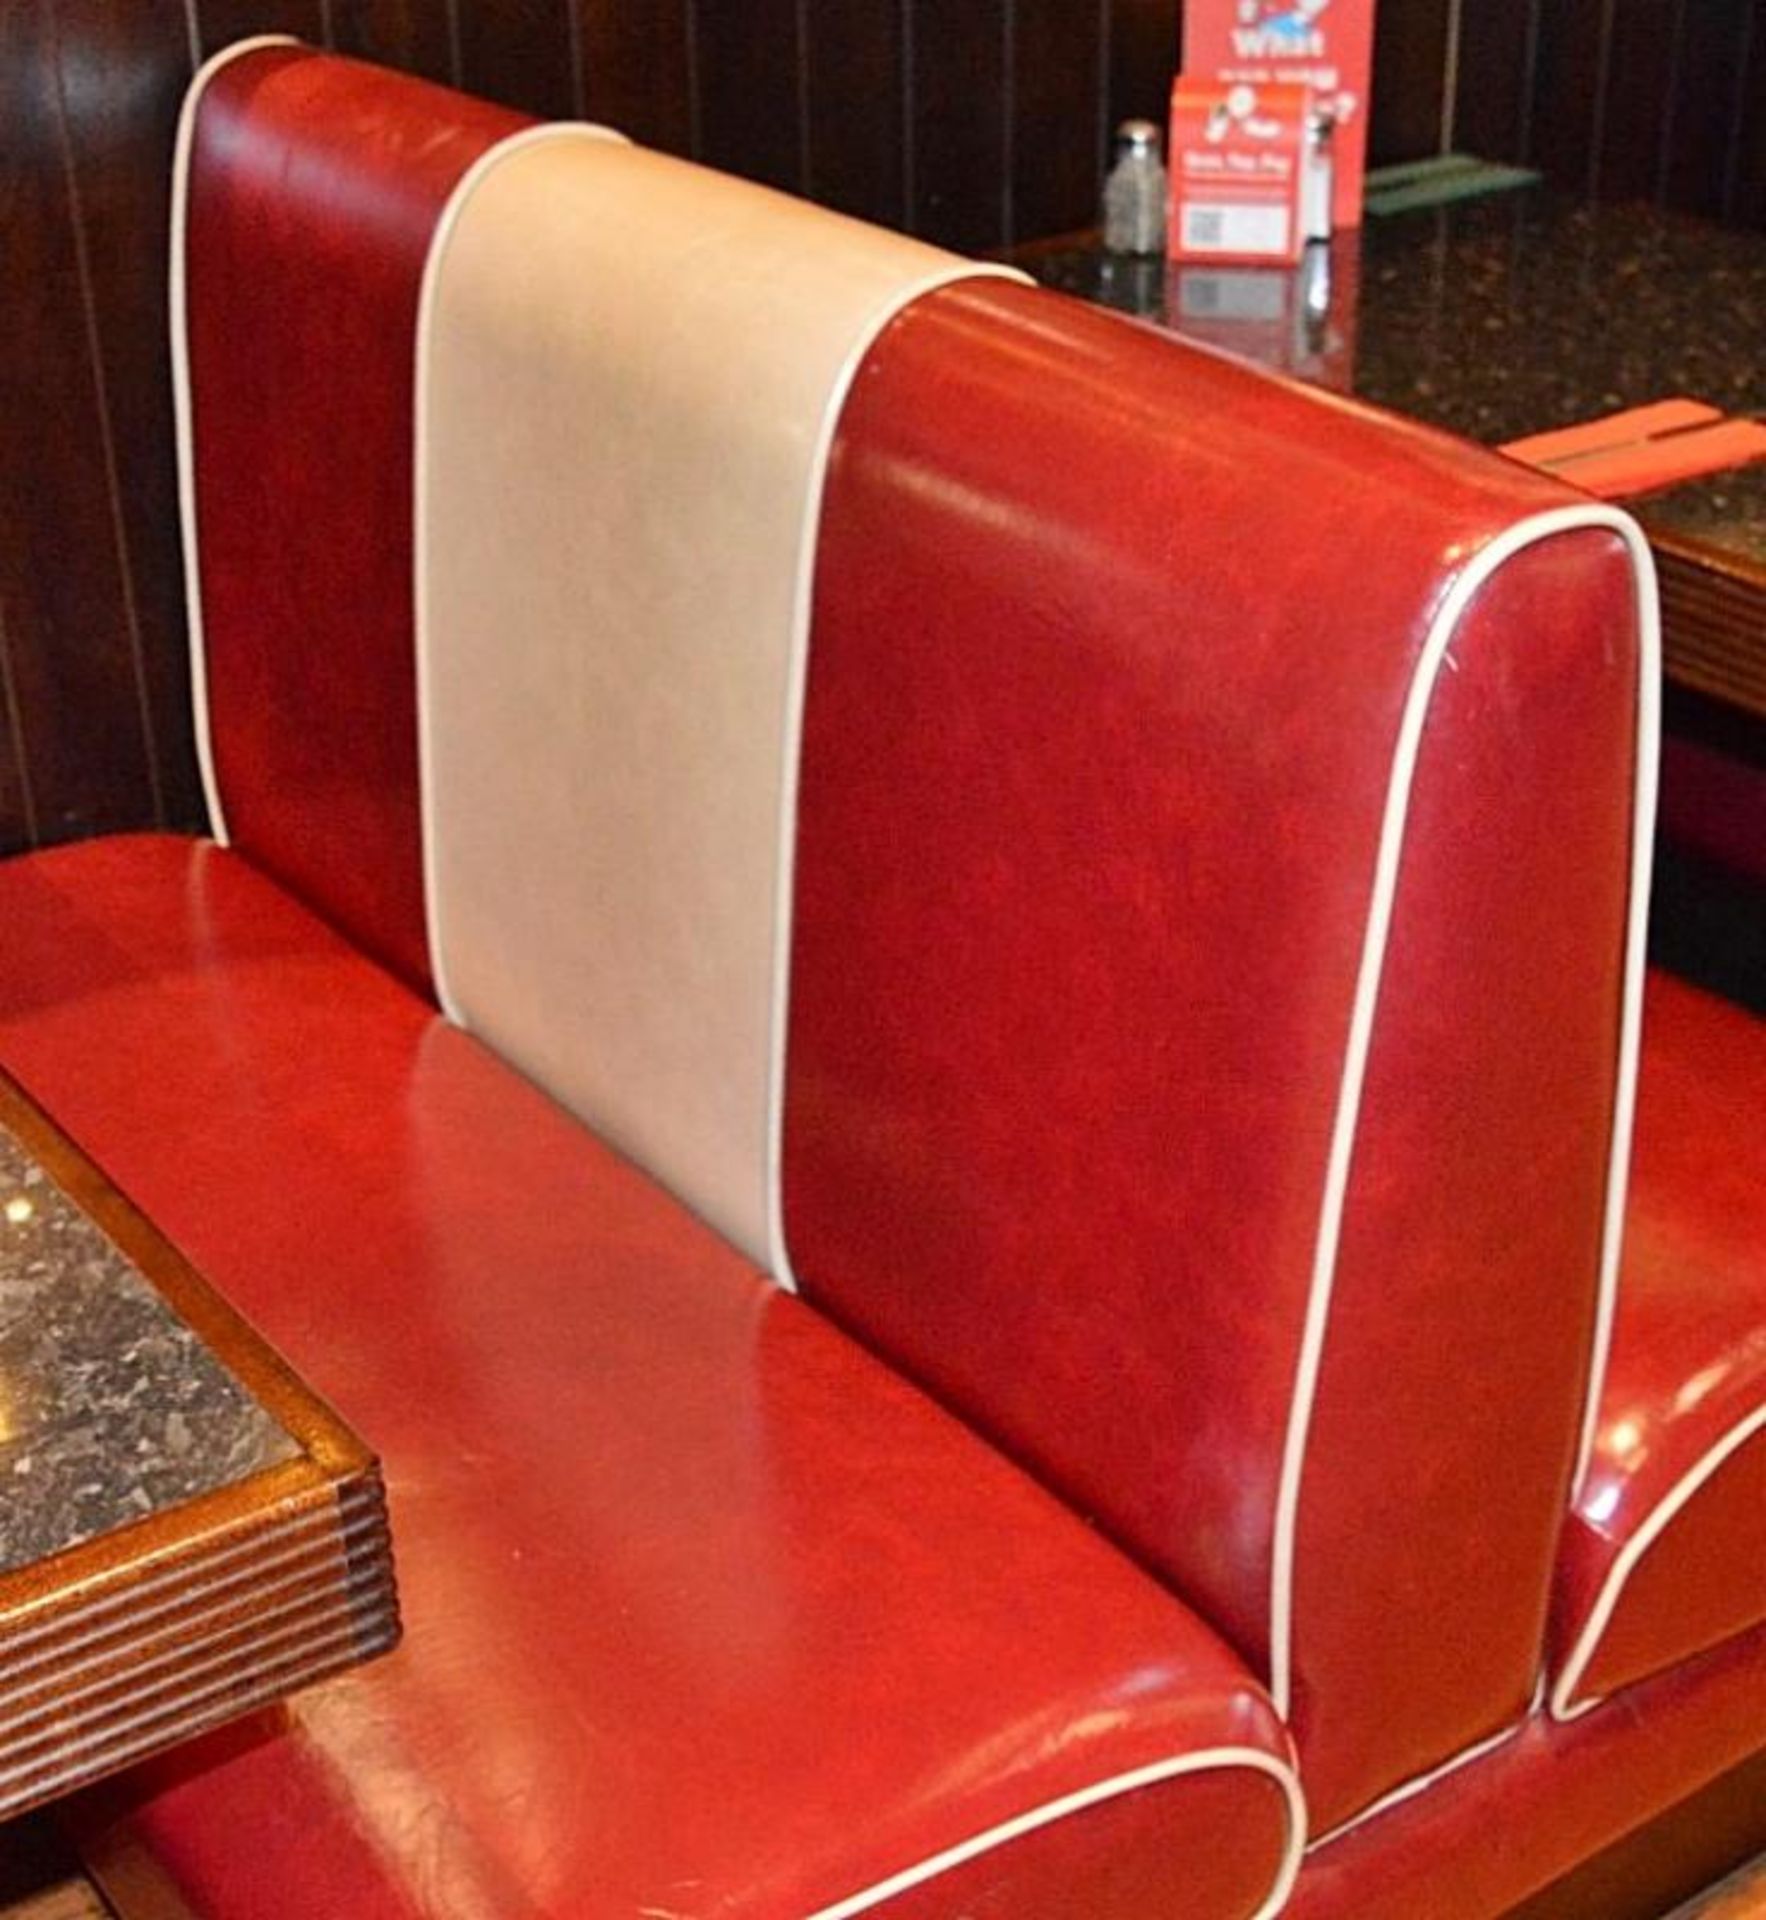 1 x Contemporary Double-Sided Booth Seating Upholstered In A Bright Red Faux Leather - H100 x W120 x - Image 4 of 4